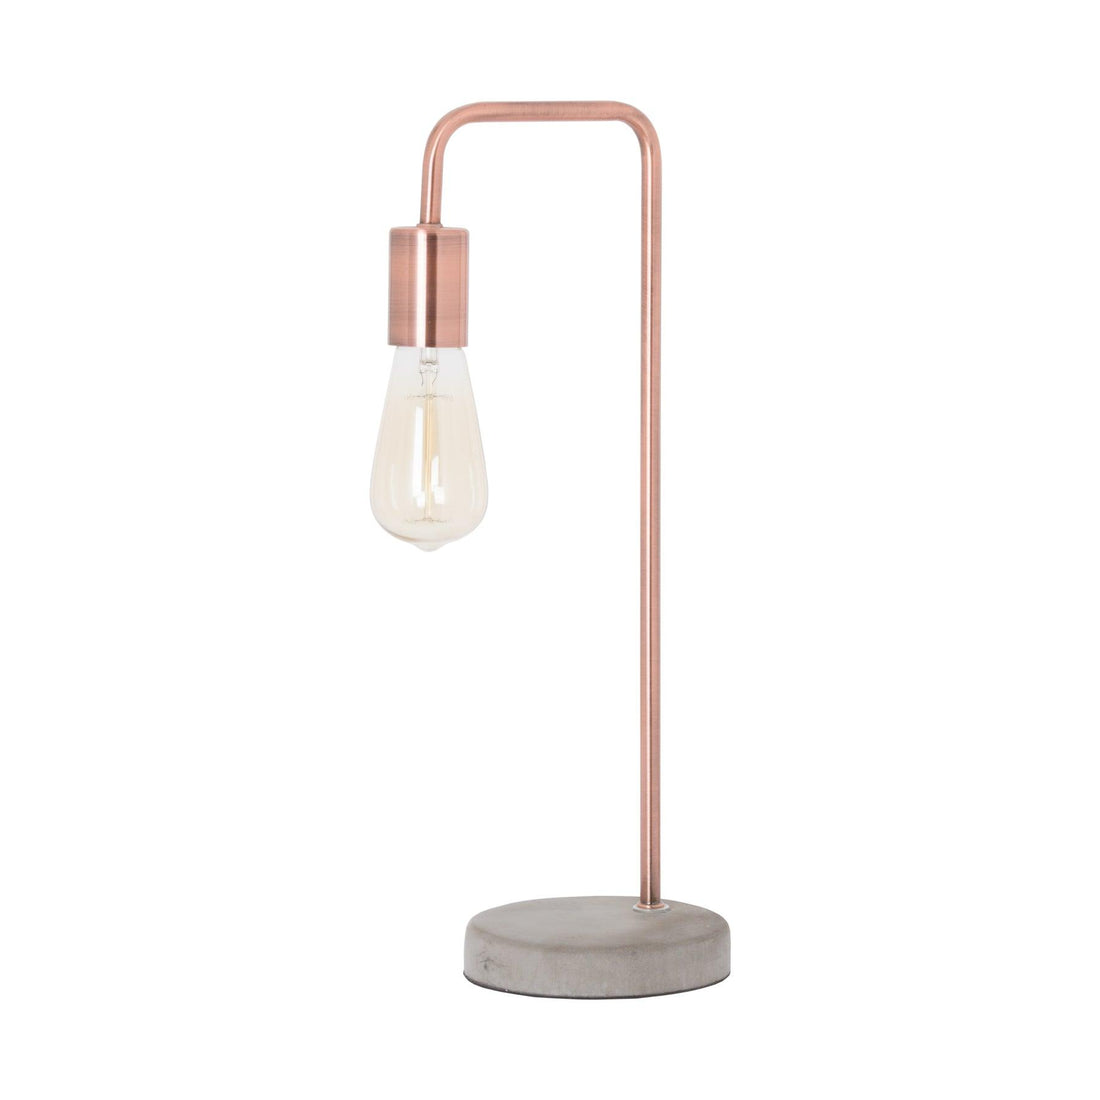 Copper Industrial Lamp With Stone Base - £49.95 - Lighting > Table Lamps > Lighting 